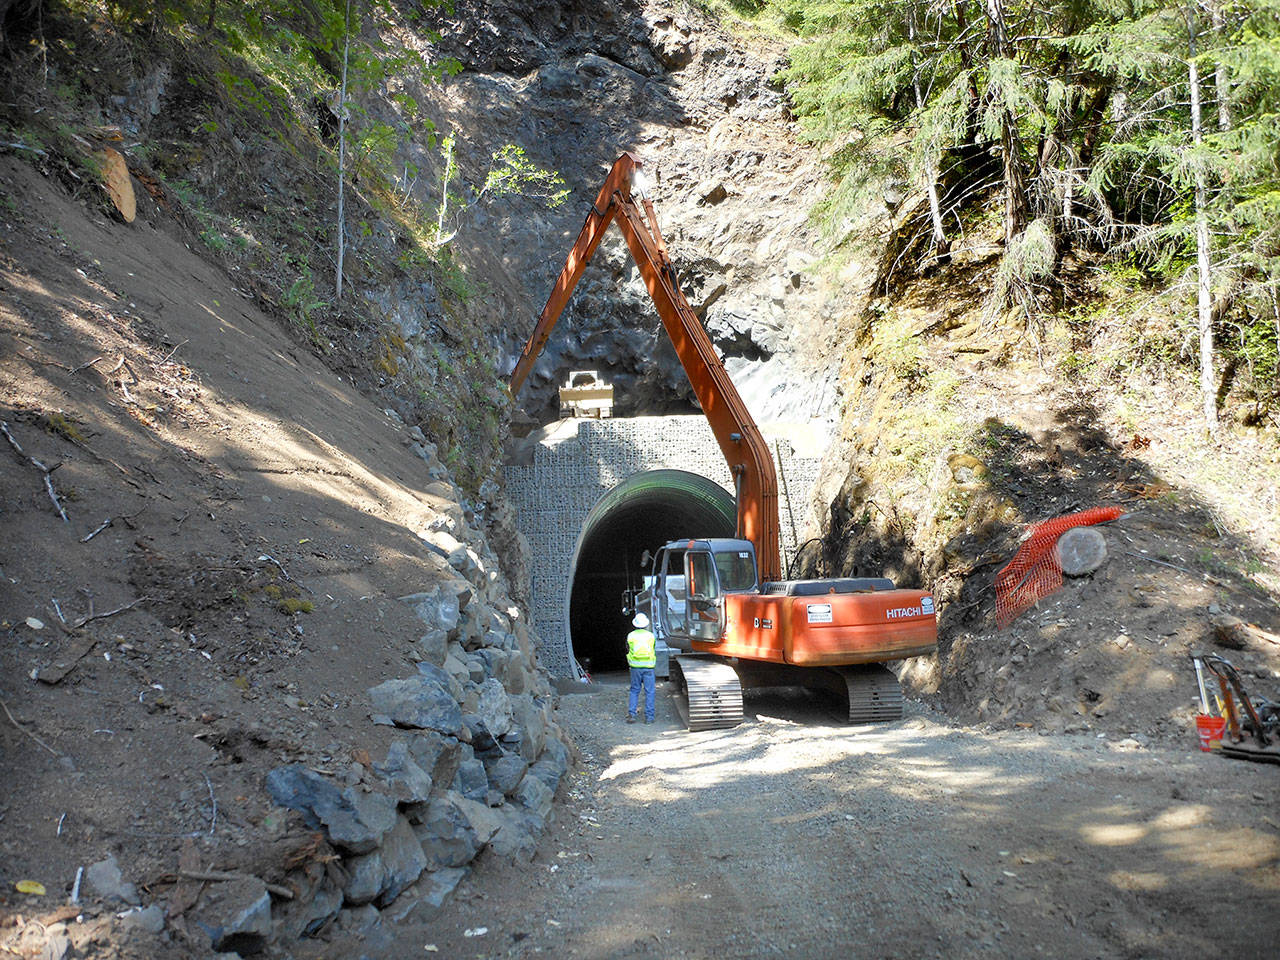 A dedication ceremony for the refurbished McFee Tunnel on the Spruce Railroad Trail is scheduled for this Saturday. Work on more than a half-mile segment of the trail recently was completed. Photo by Rich James/Clallam County